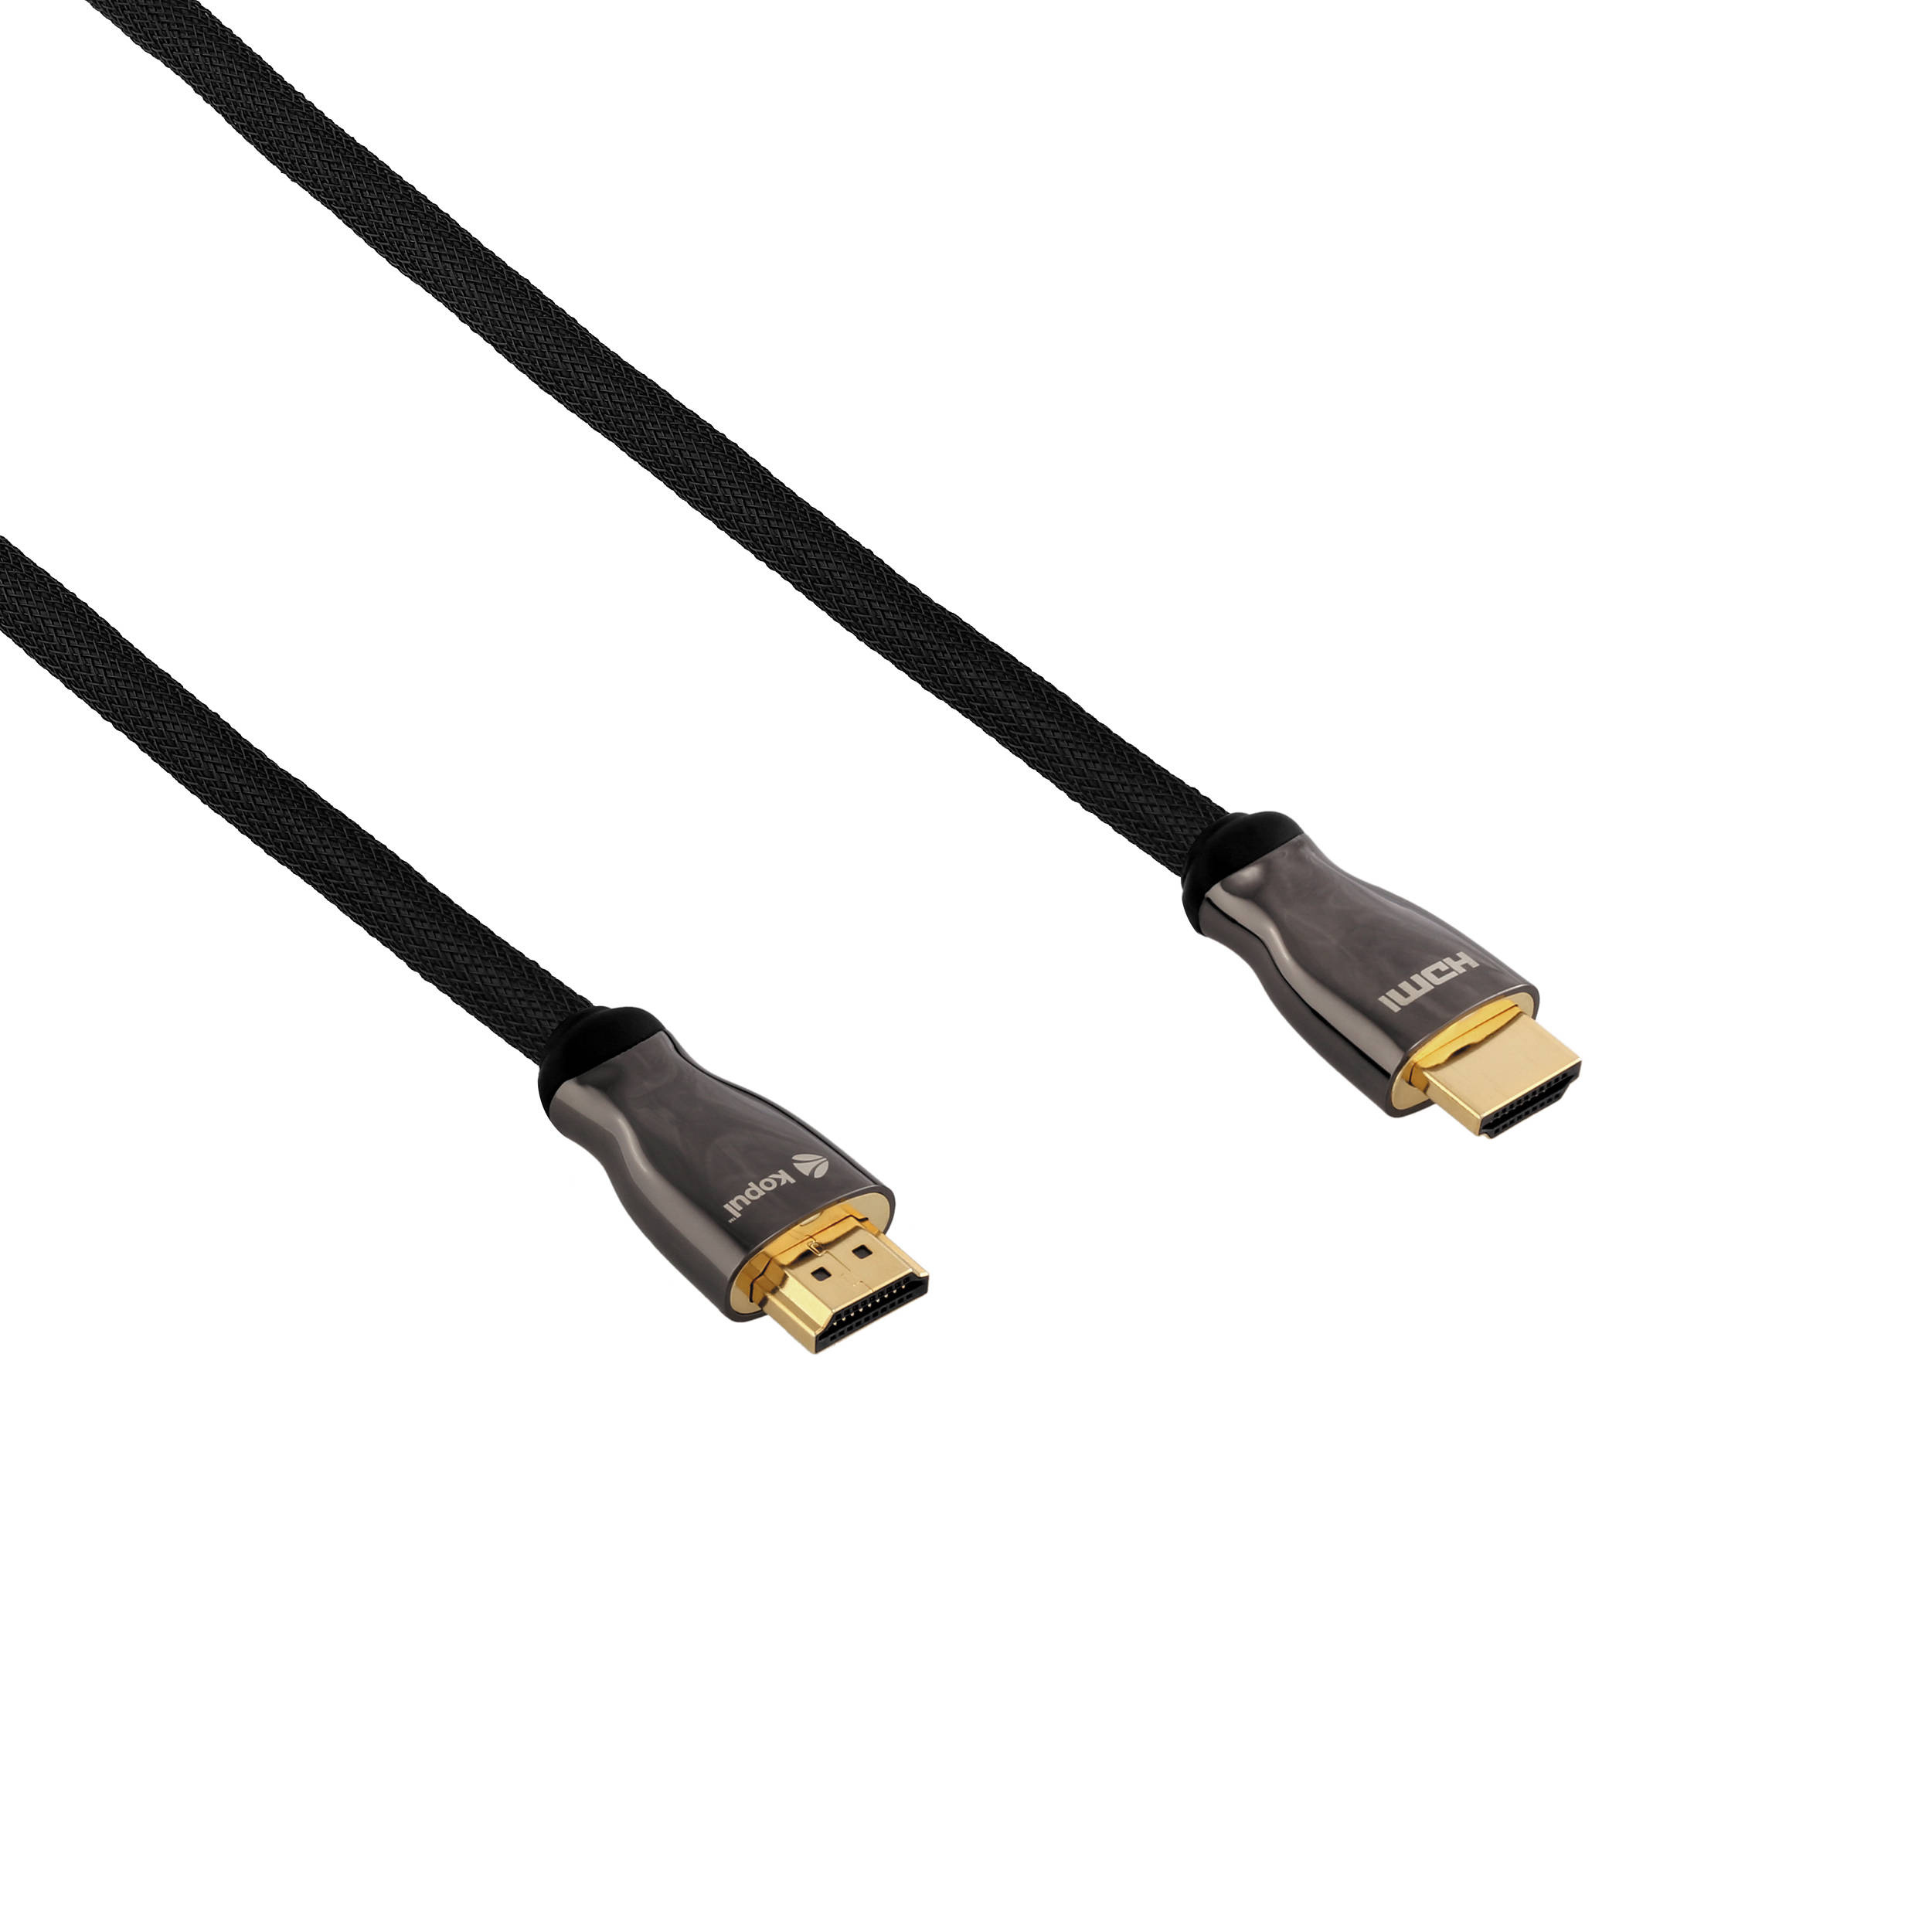 Kopul HDA-515BR Premium Braided High-Speed HDMI Cable with Ethernet (15')